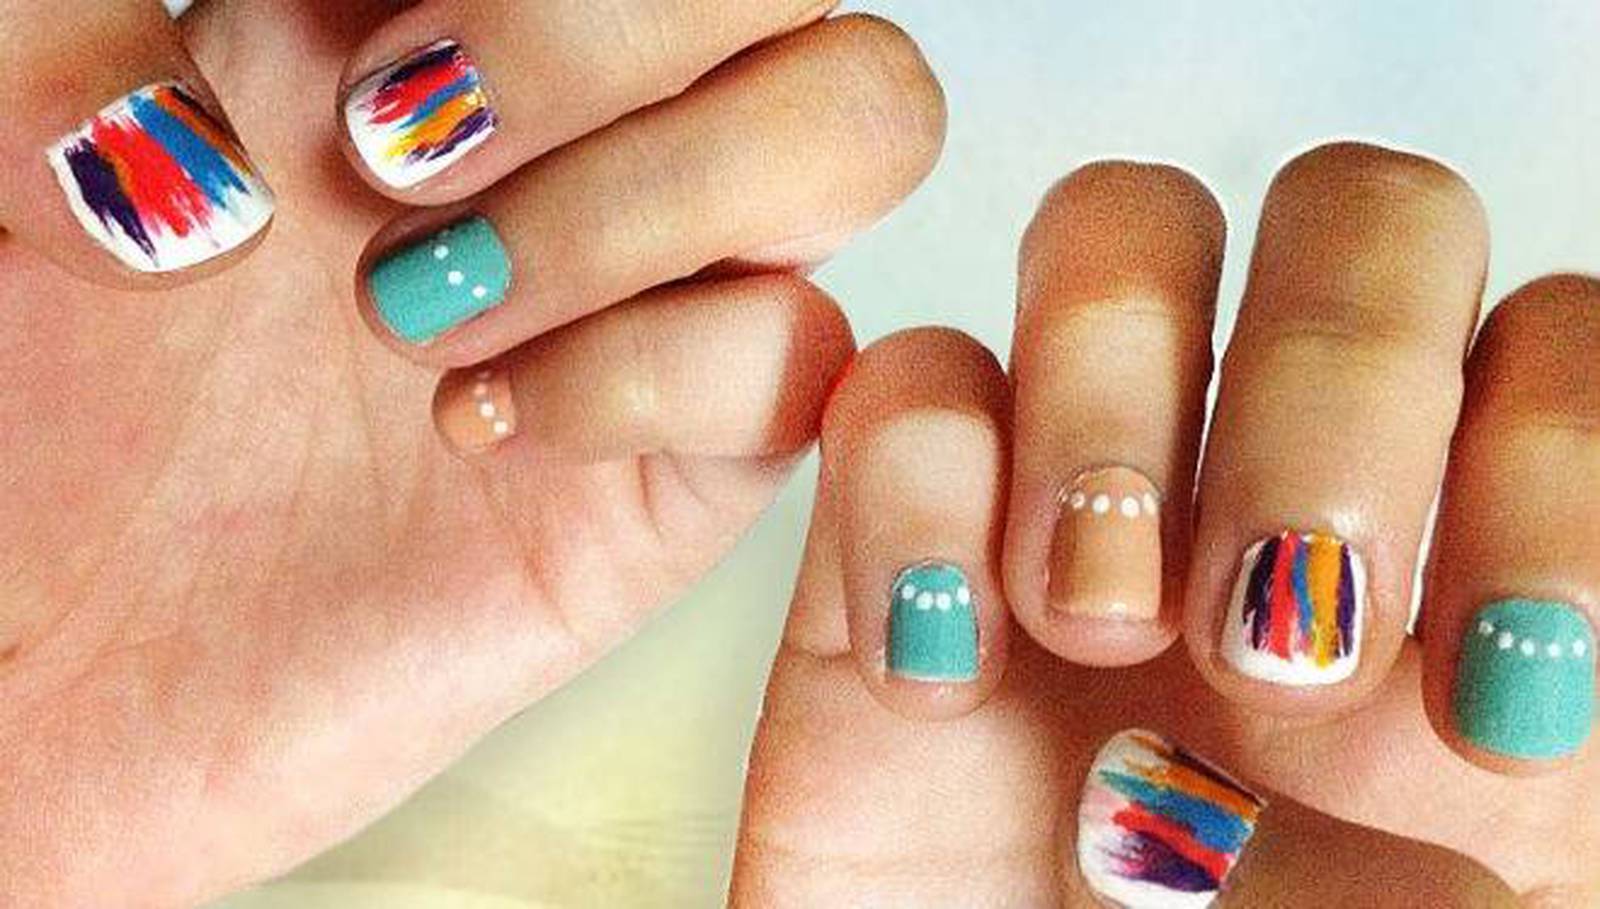 5. DIY Nail Art with Scotch Tape - wide 6